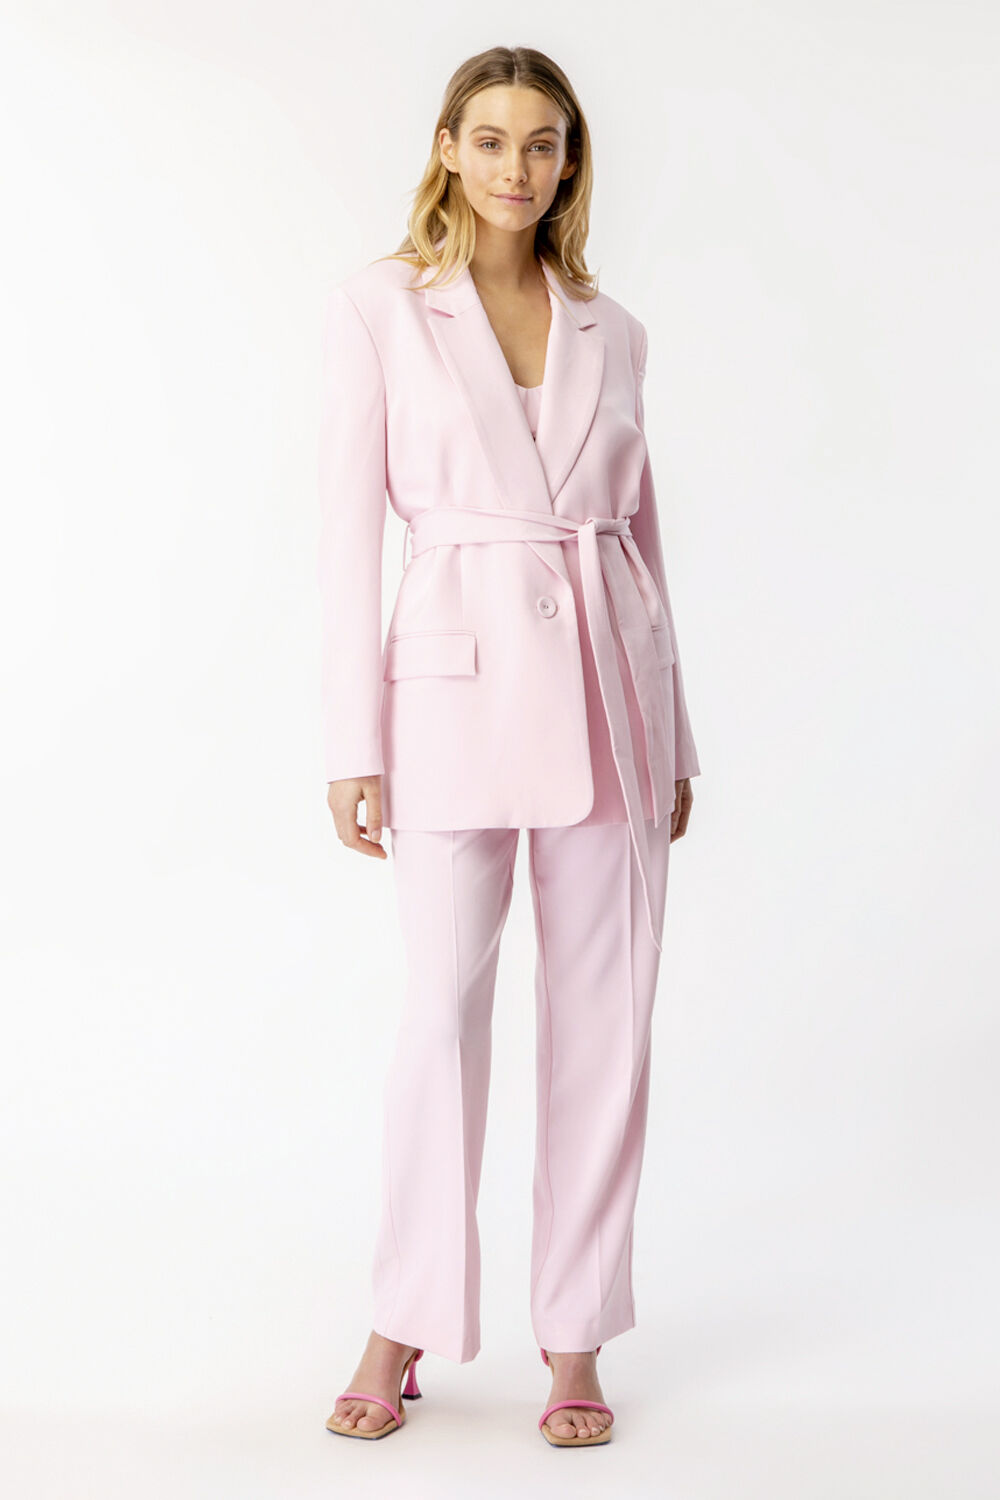 MAISON STRAIGHT LEG PANT  in colour SOFT PINK